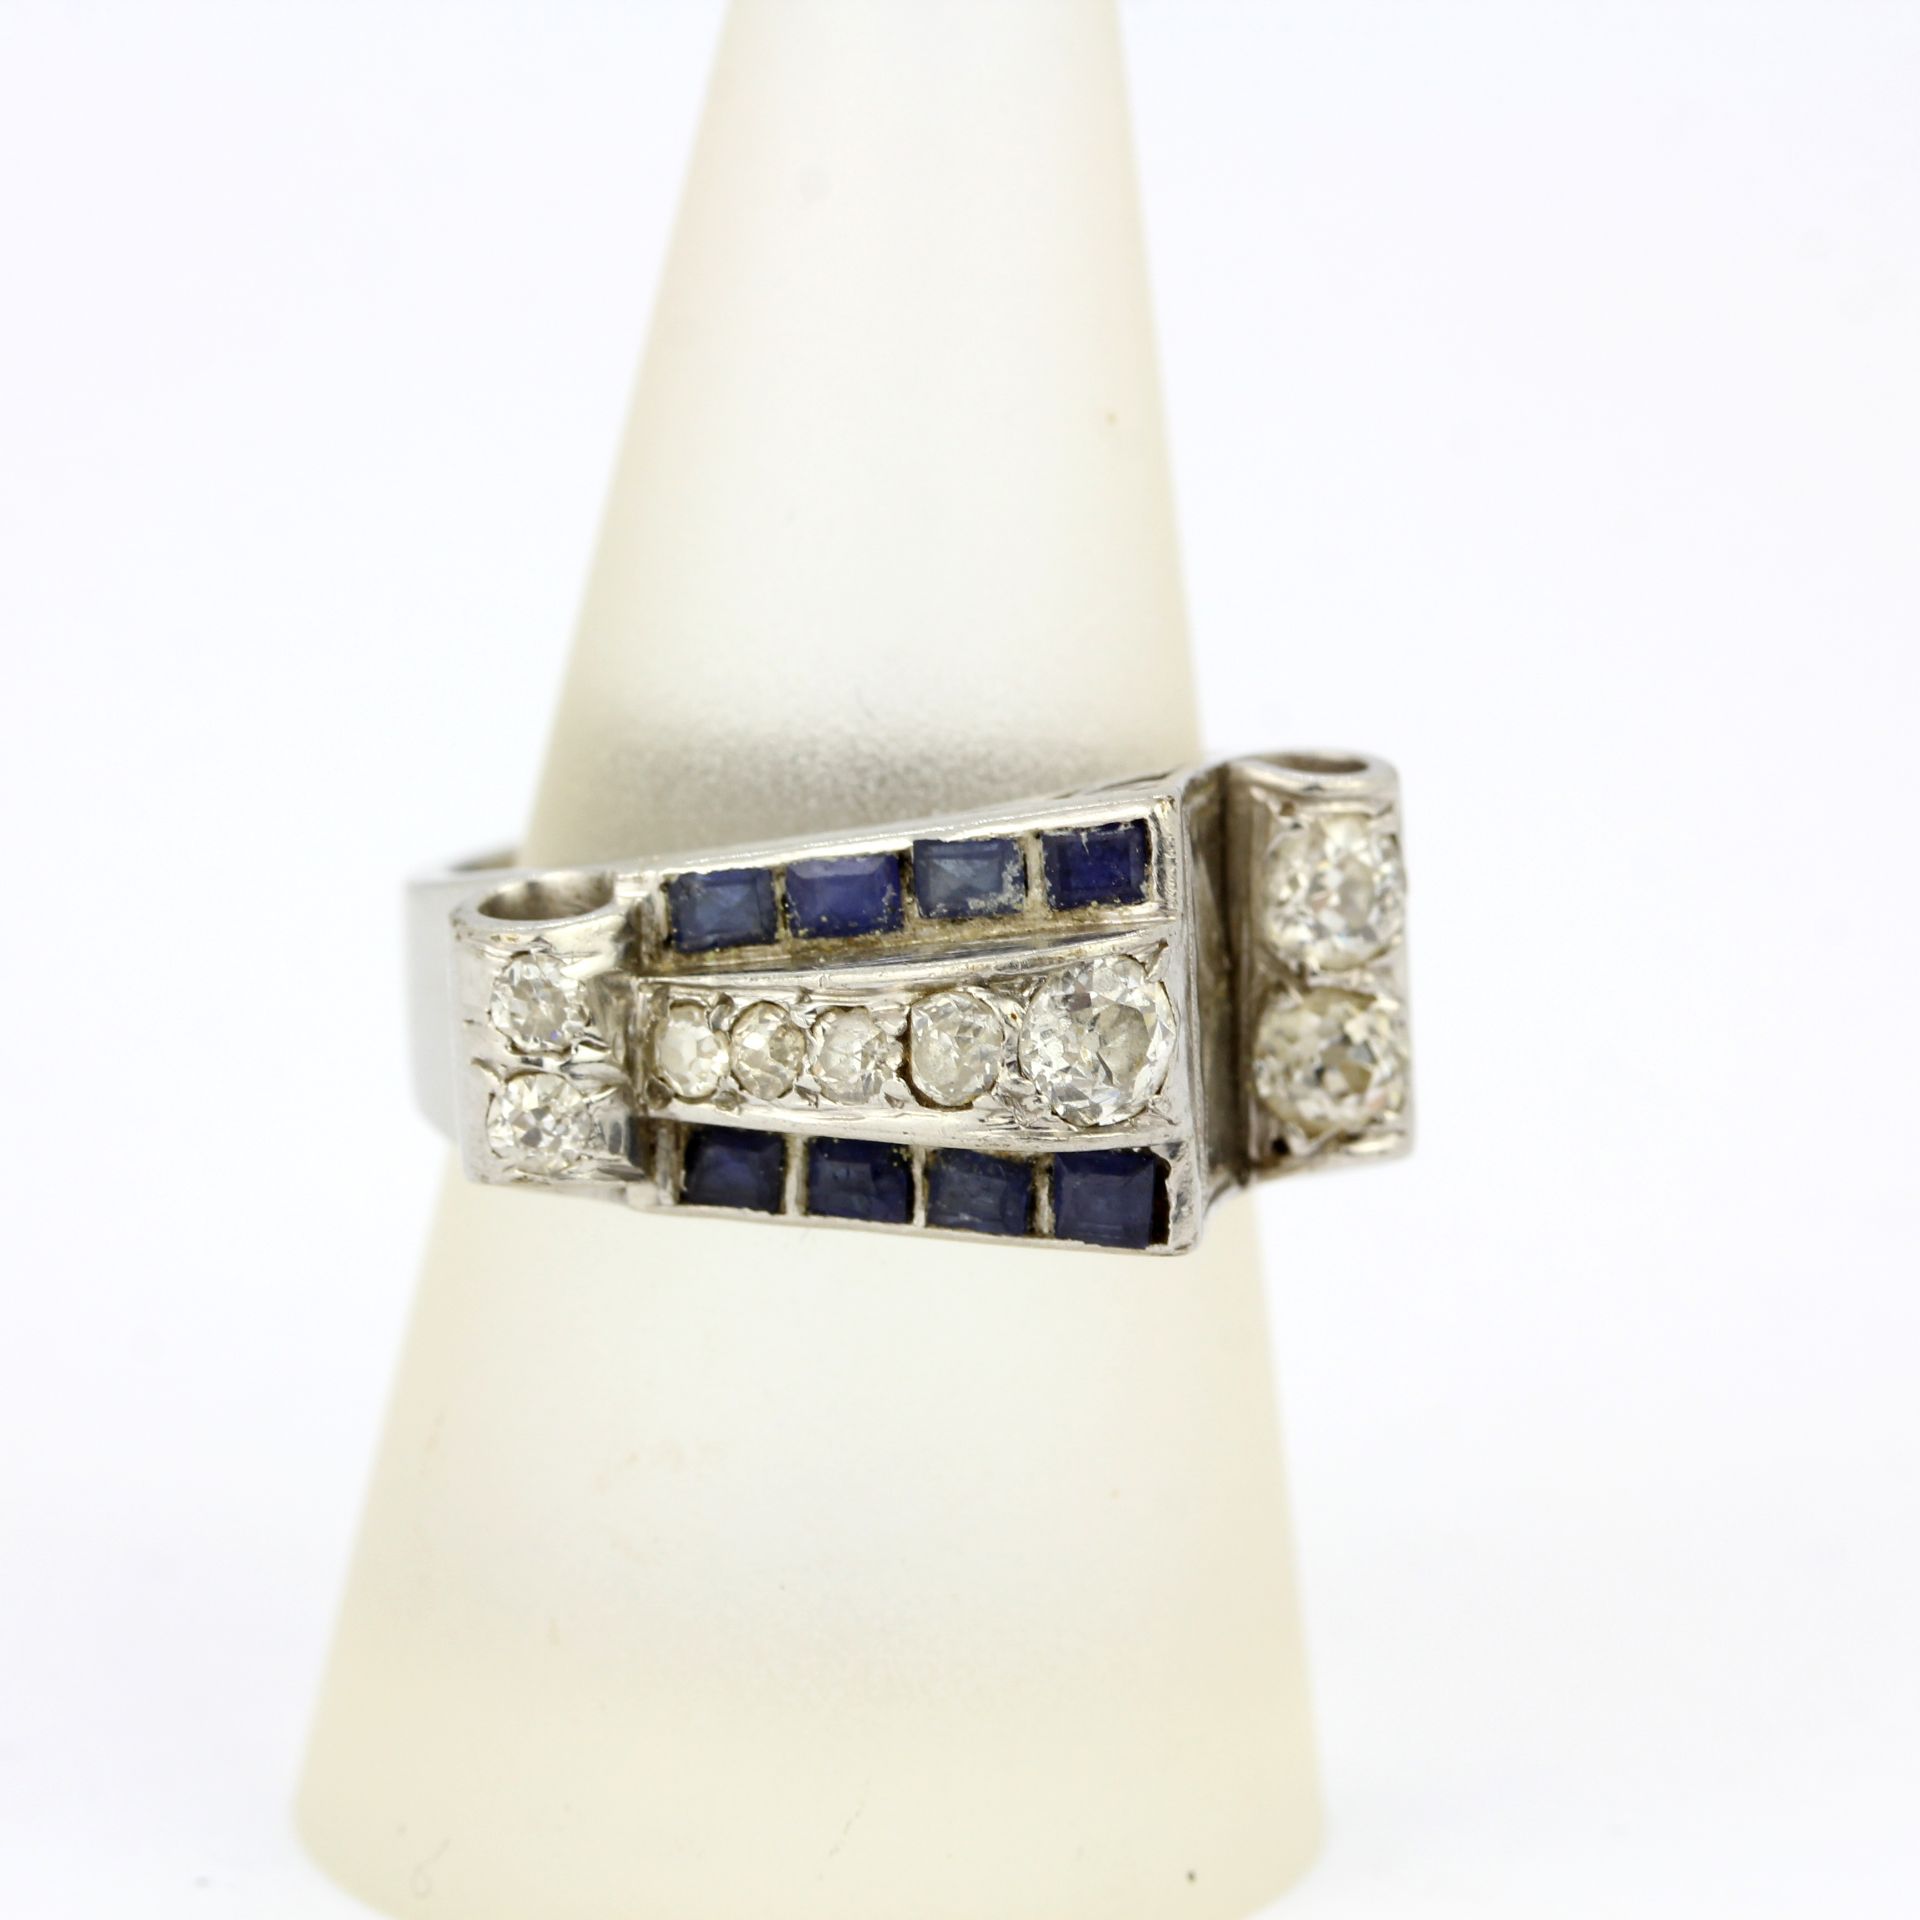 A white metal (tested minimum 9ct gold) ring set with step cut sapphires and old brilliant cut